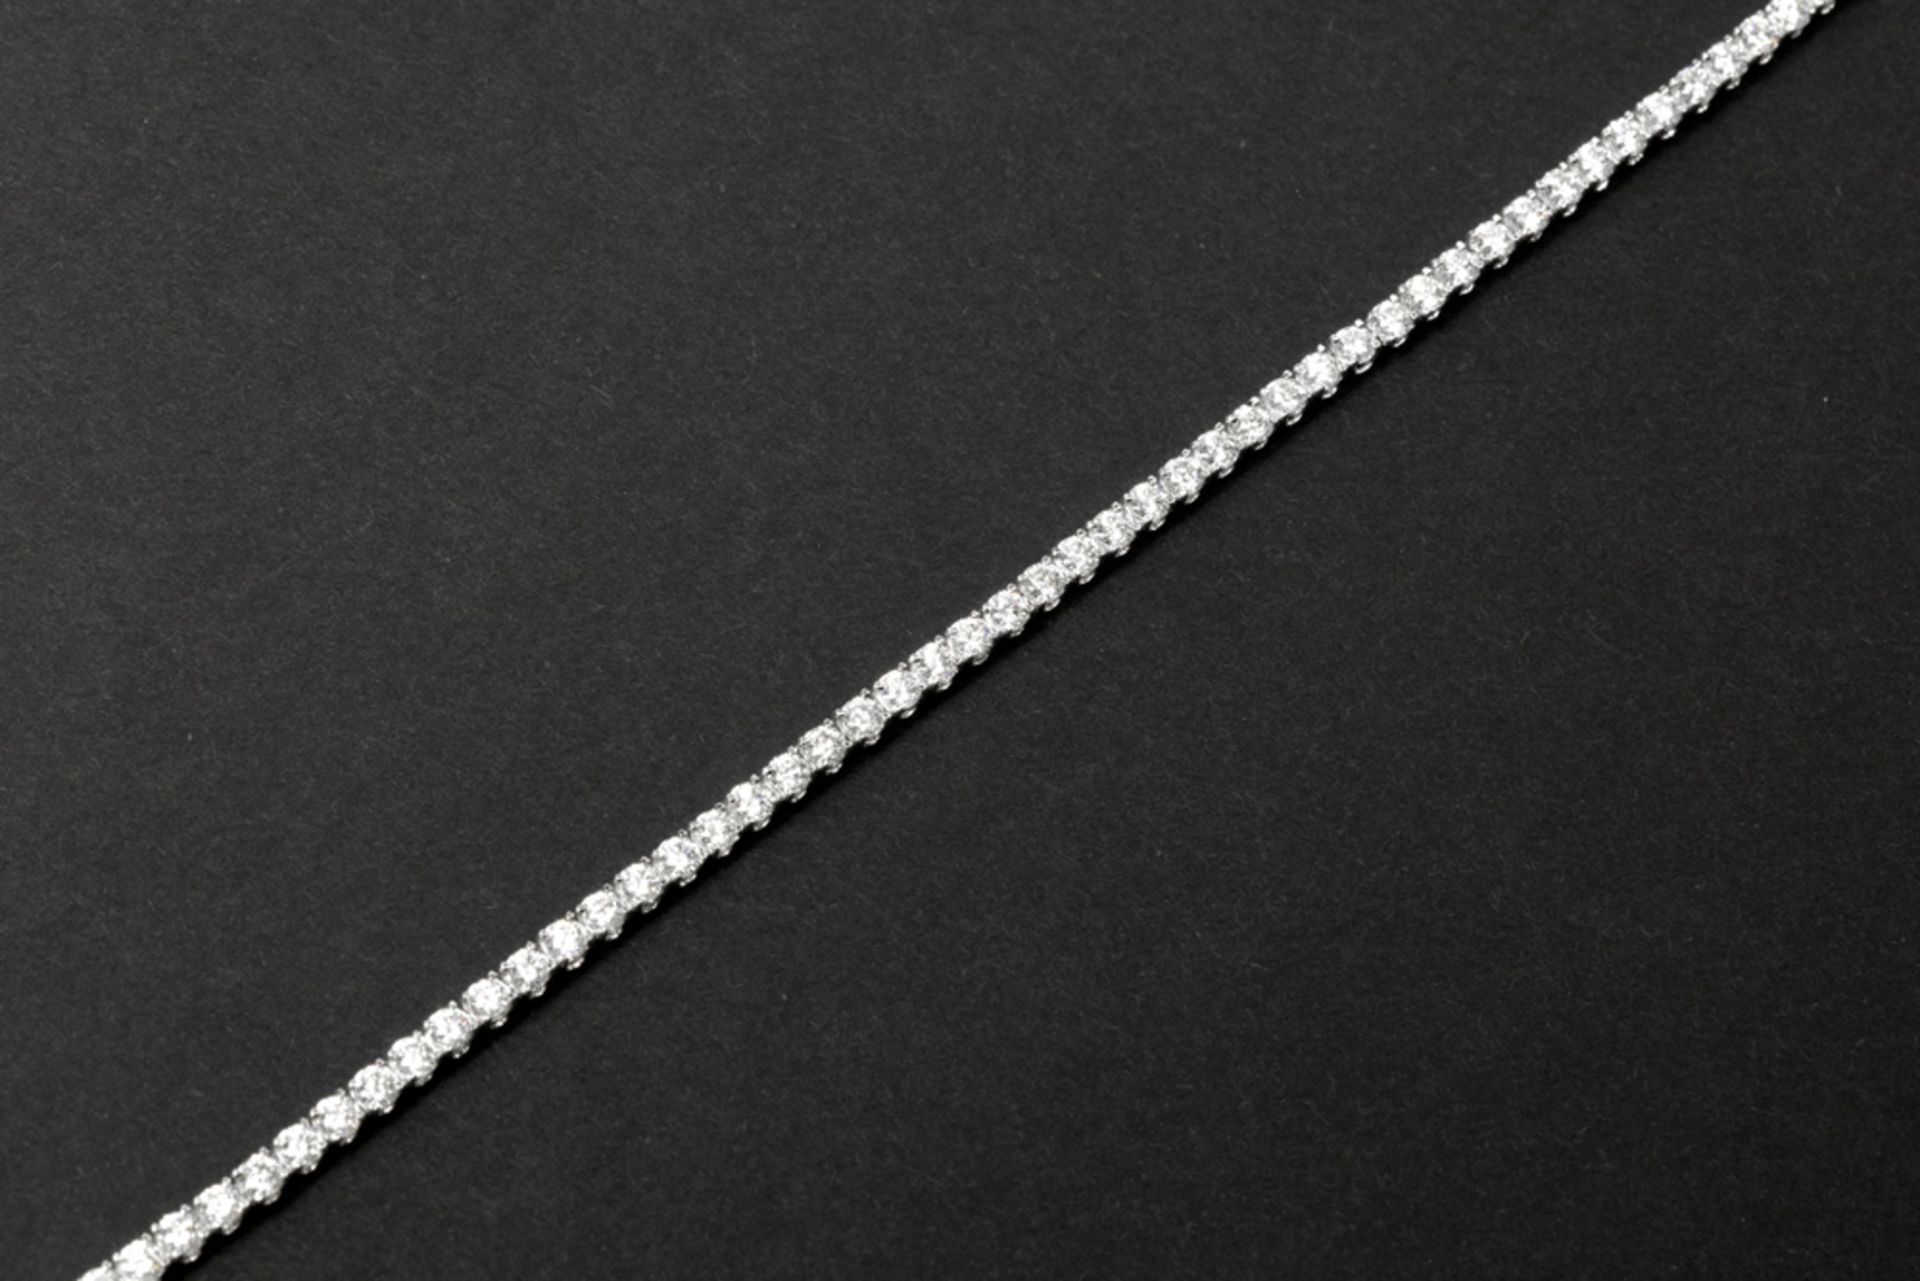 bracelet in white gold (18 carat) with 3,38 carat of top quality brilliant cut diamonds with GEM - Image 2 of 3